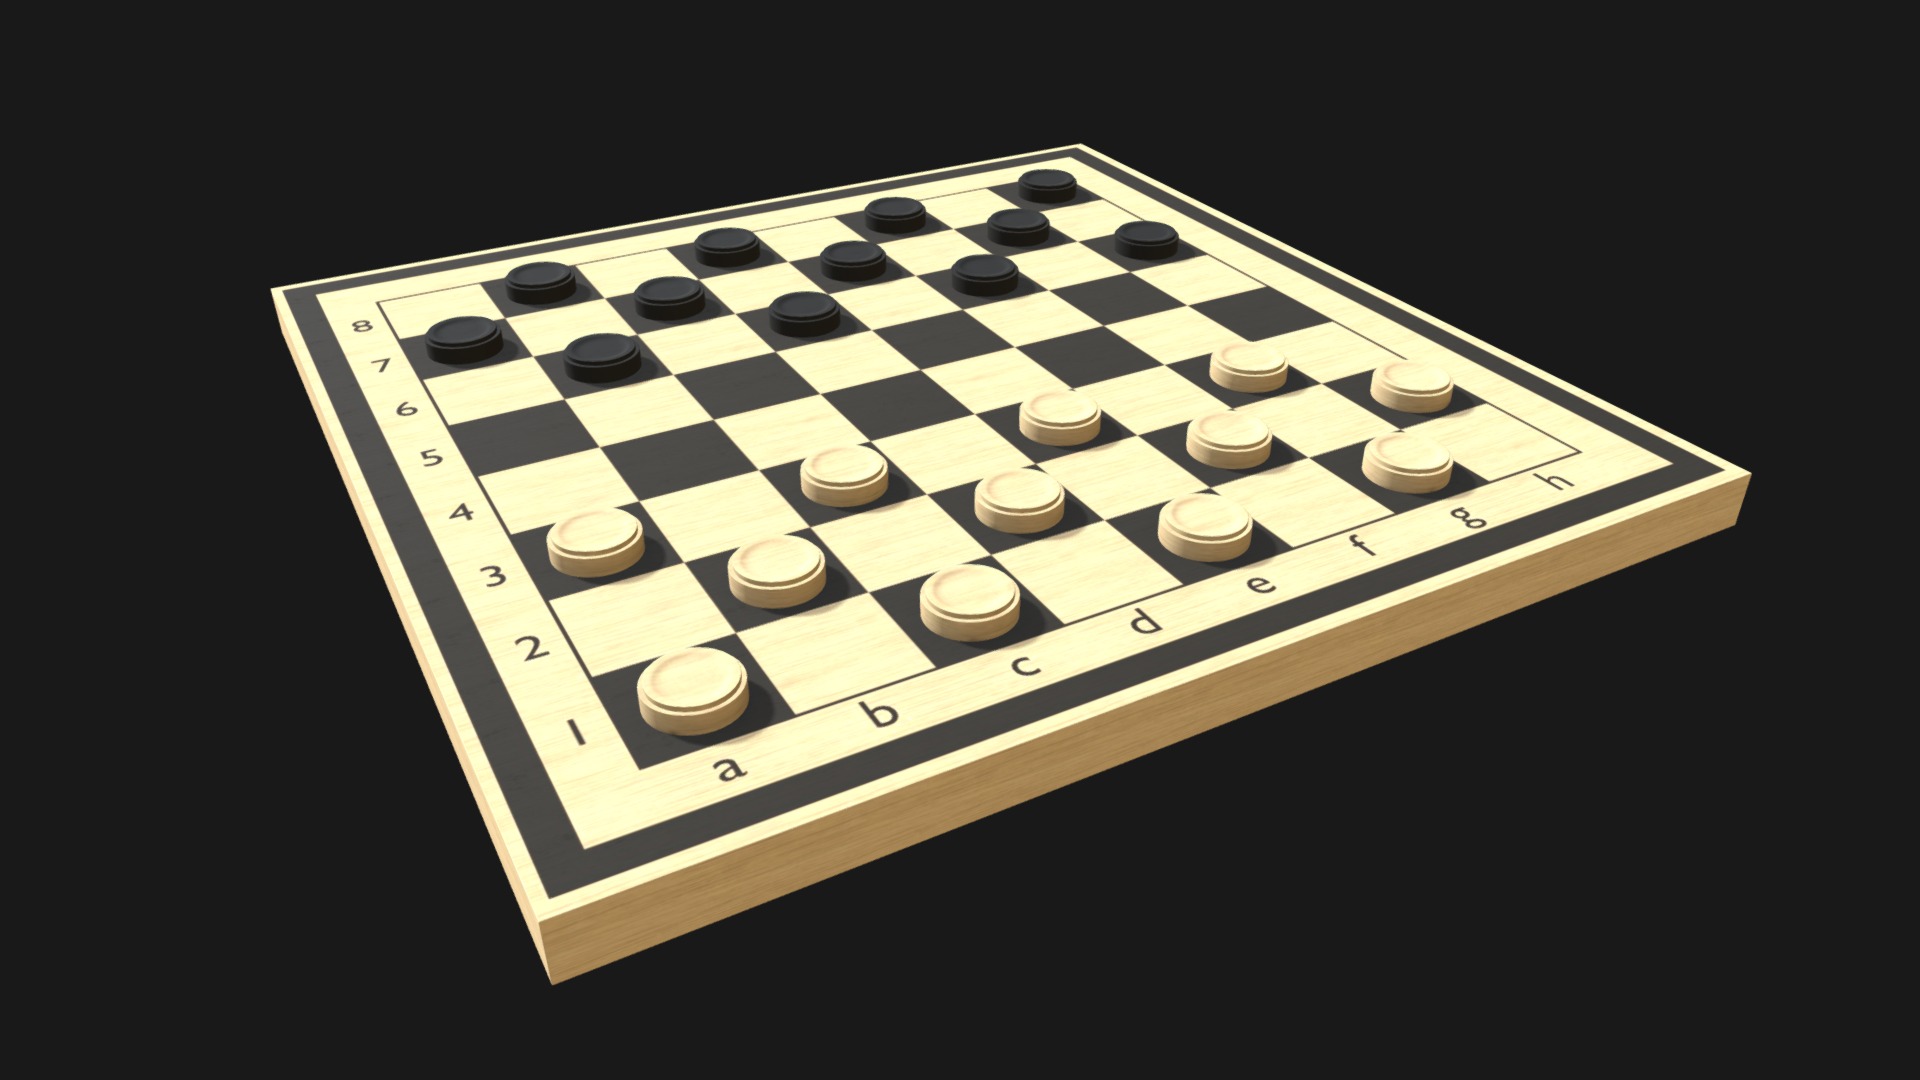 3D model Draughts game board - This is a 3D model of the Draughts game board. The 3D model is about a black and white checkered board.